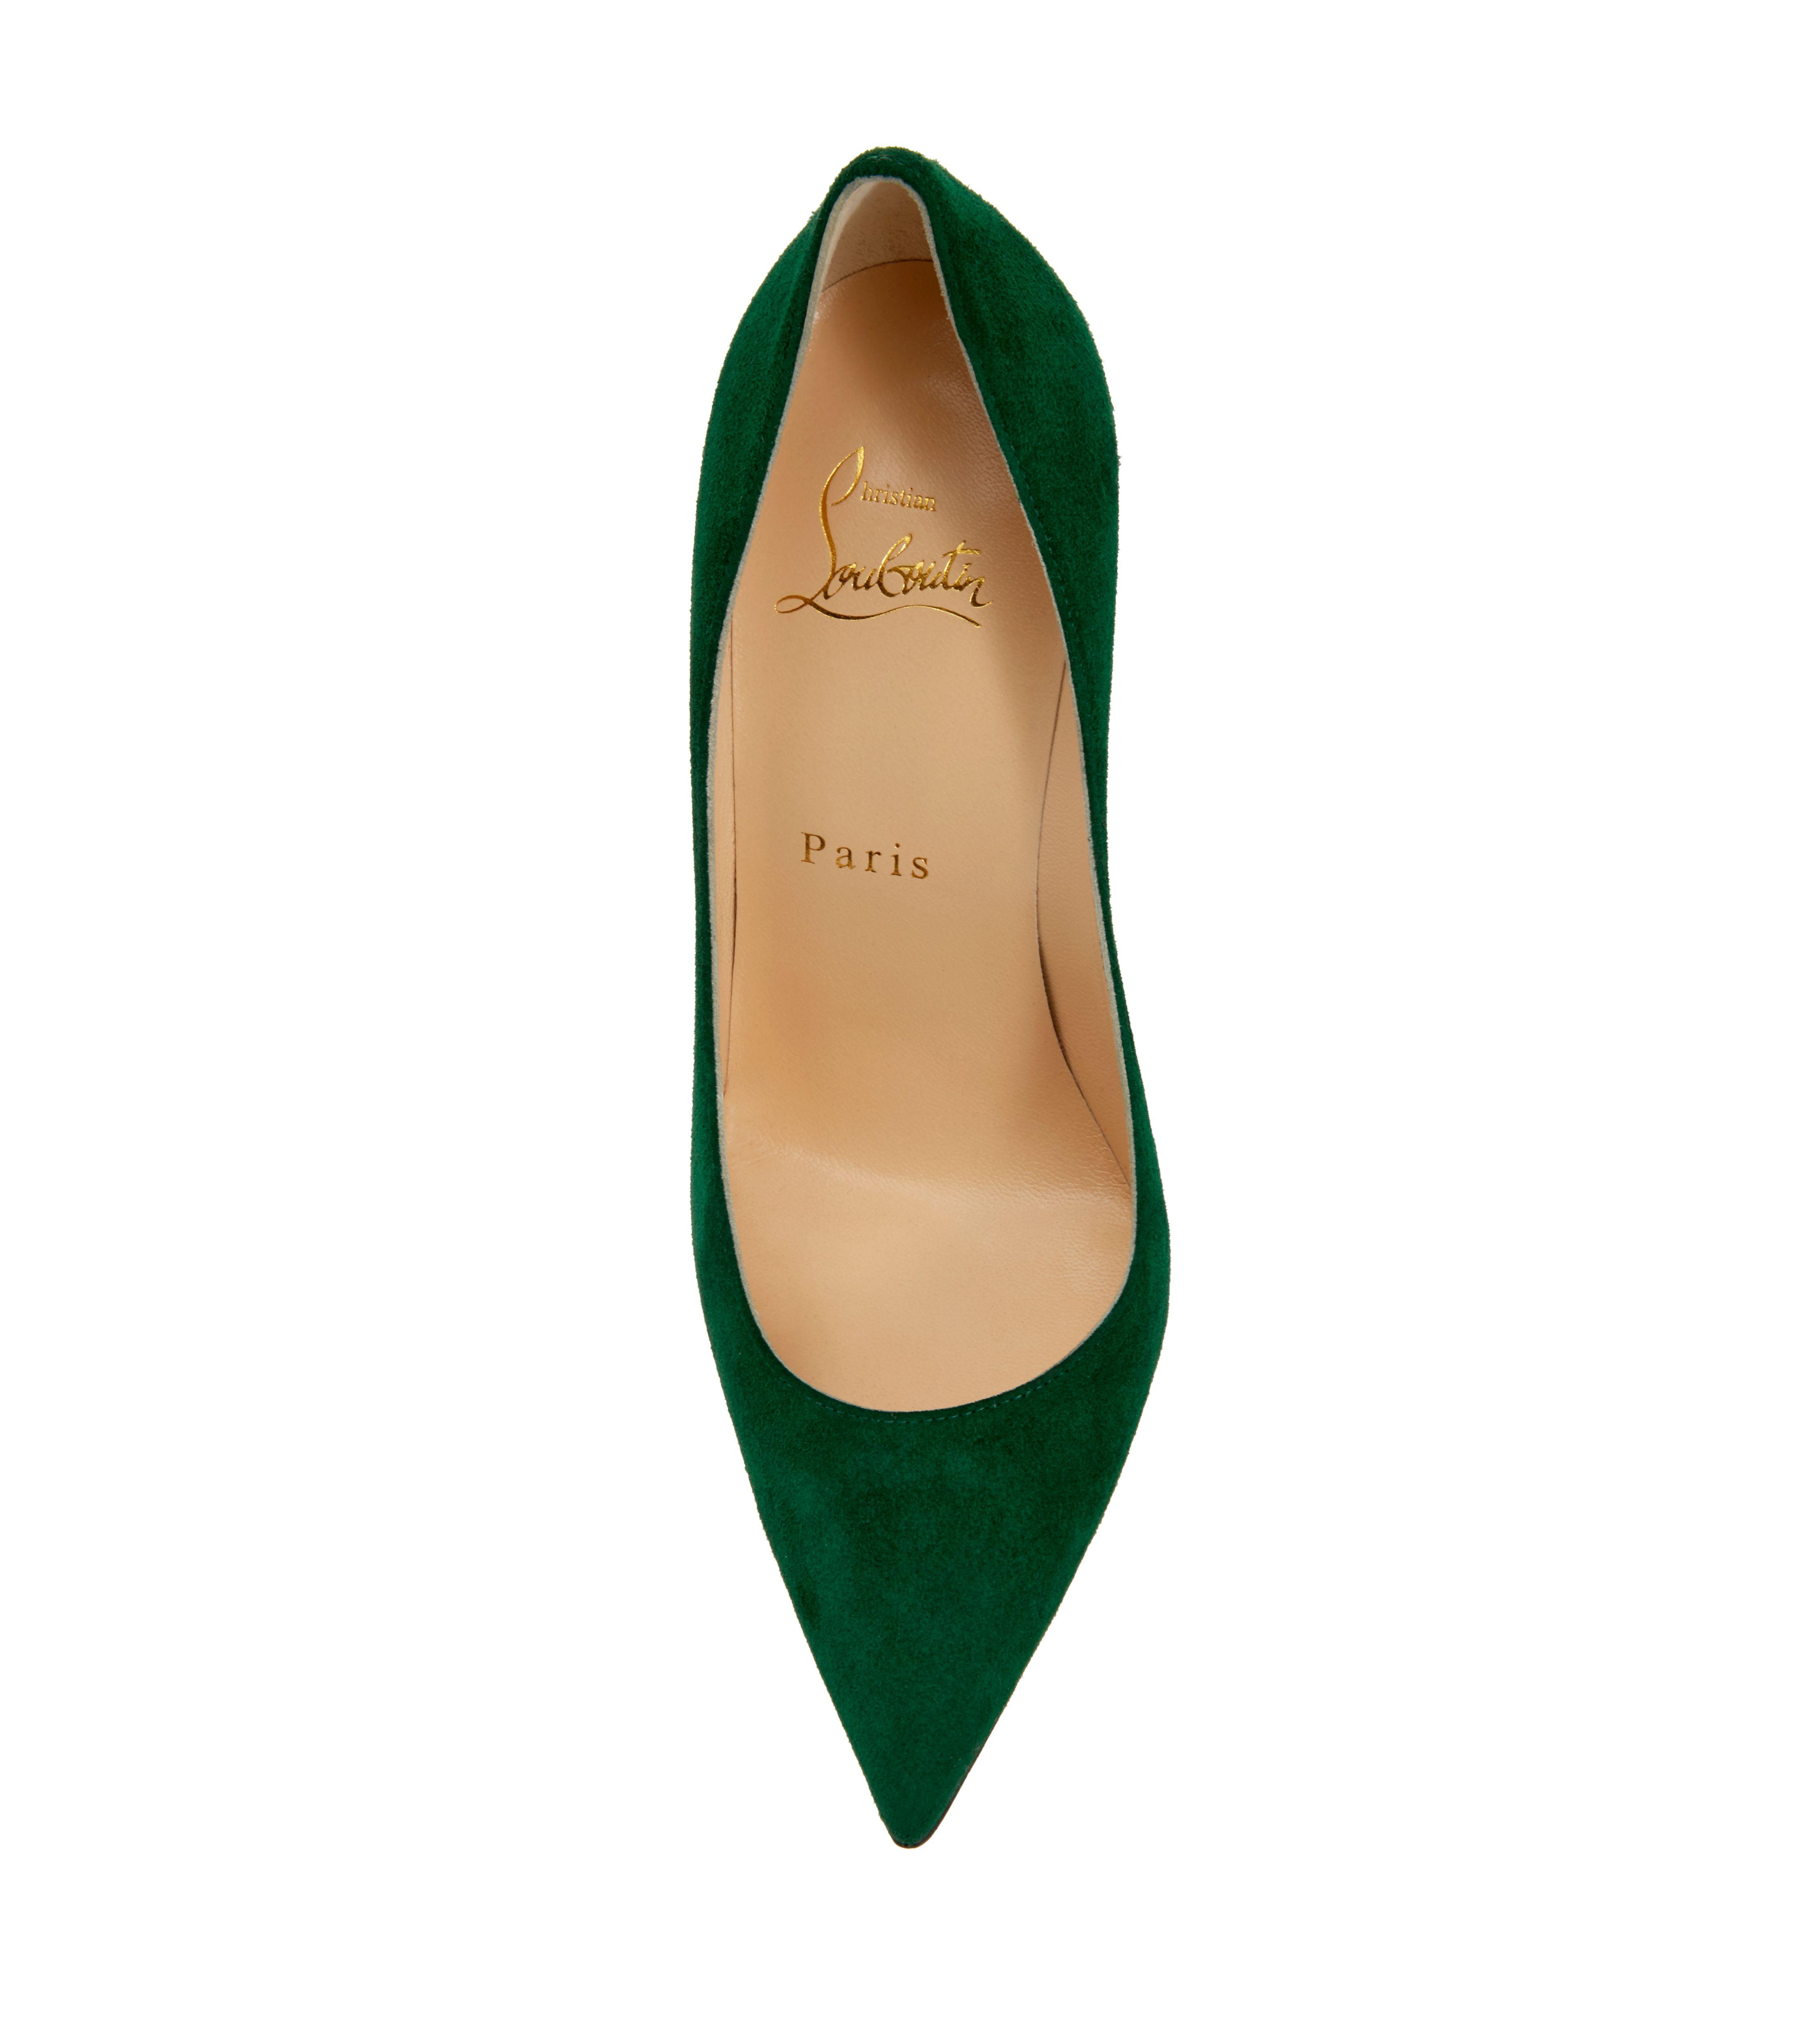 Christian Louboutin Decoltish Jungle Green Suede Pumps | Lyst